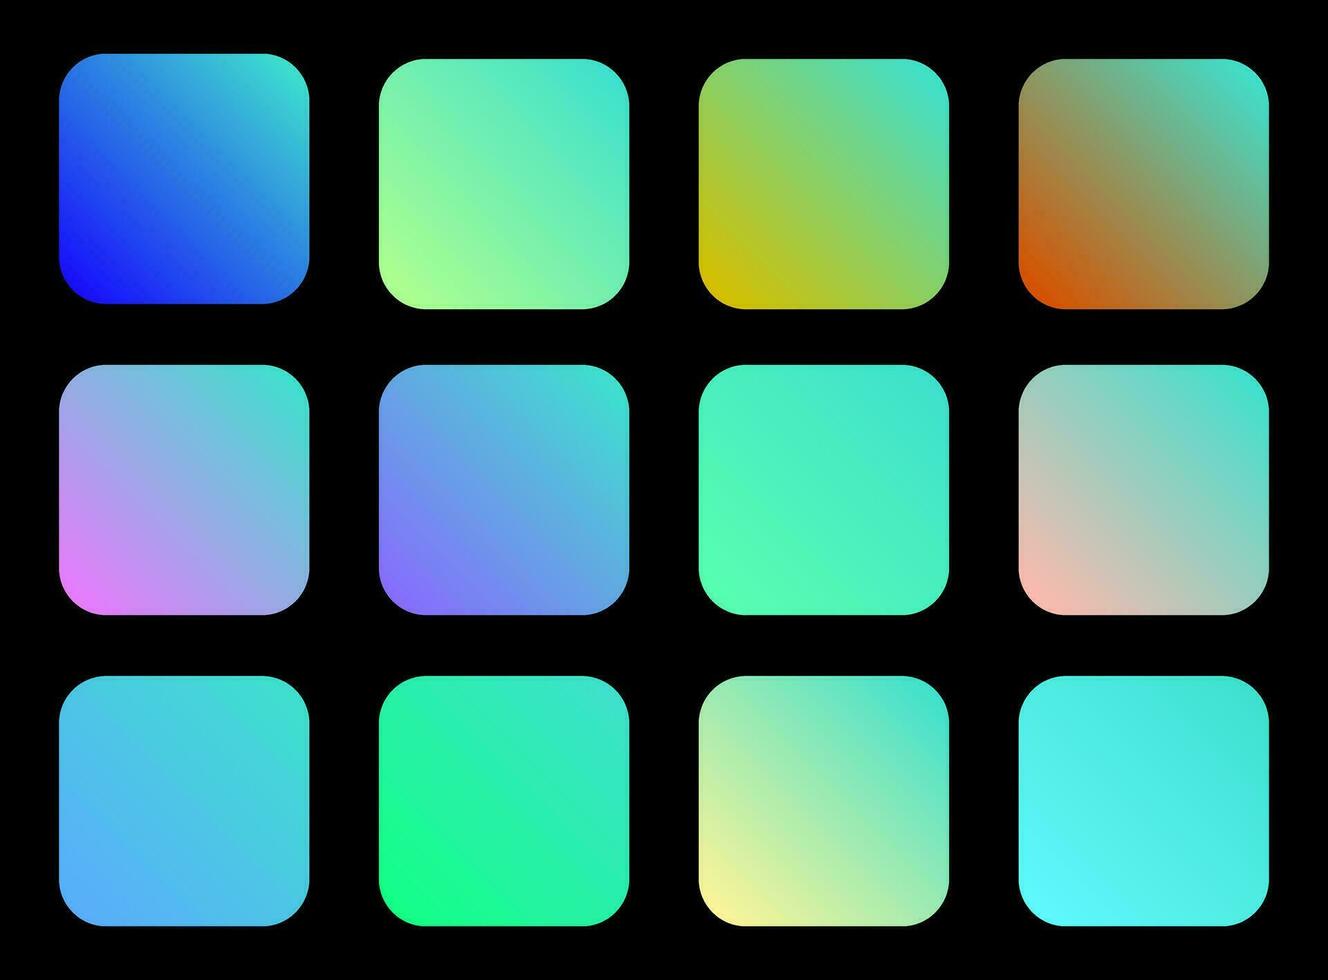 Colorful Turquoise Color Shade Linear Gradient Palette Swatches Web Kit Rounded Squares Template Set vector